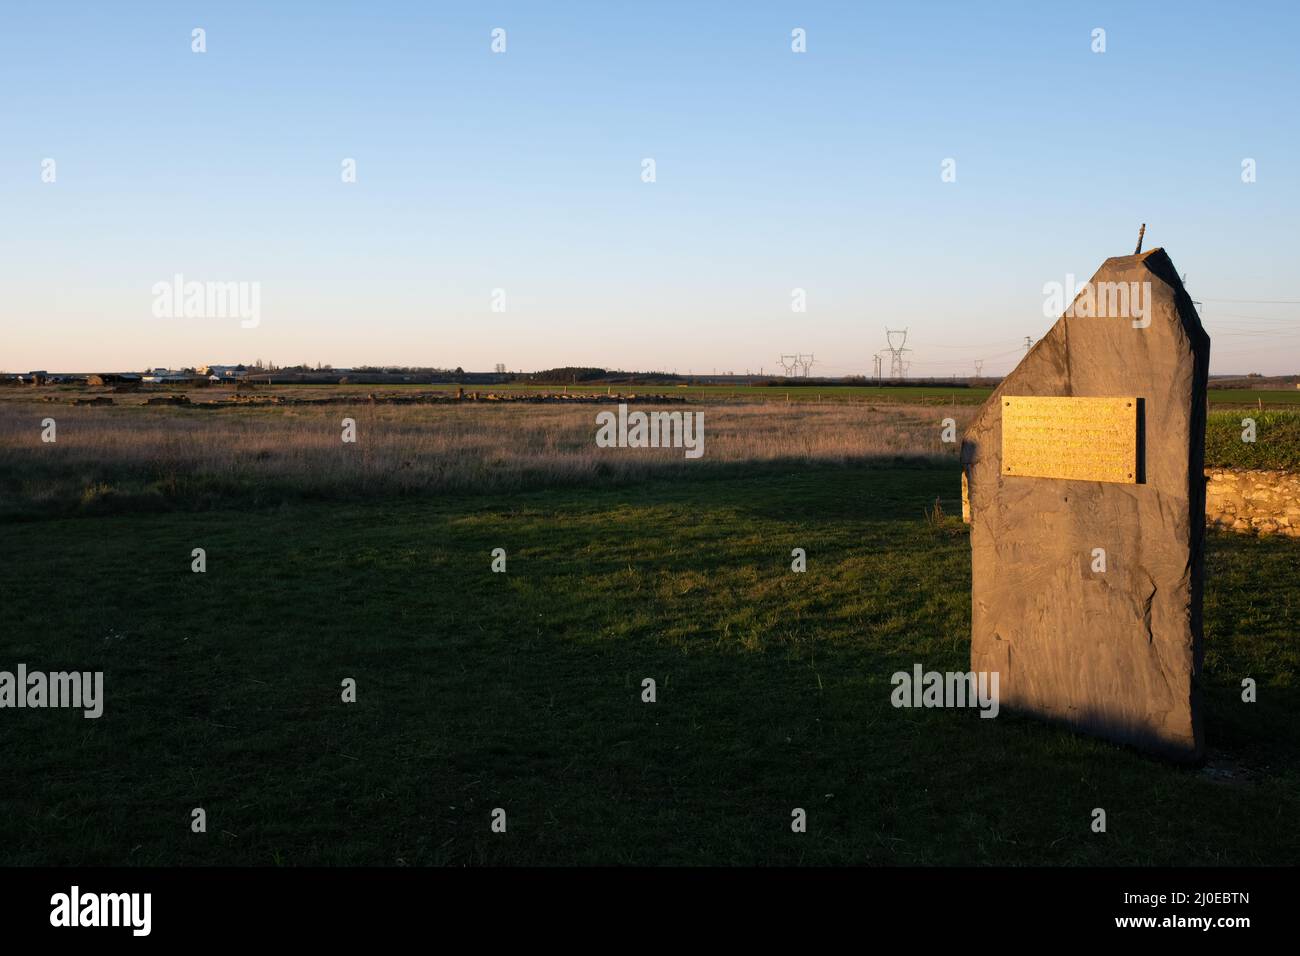 Montreuil-Bellay, France - February 26, 2022: This concentration camp in Montreuil-Bellay was used to hold 300 Roma and beggars. Memorial site. Select Stock Photo